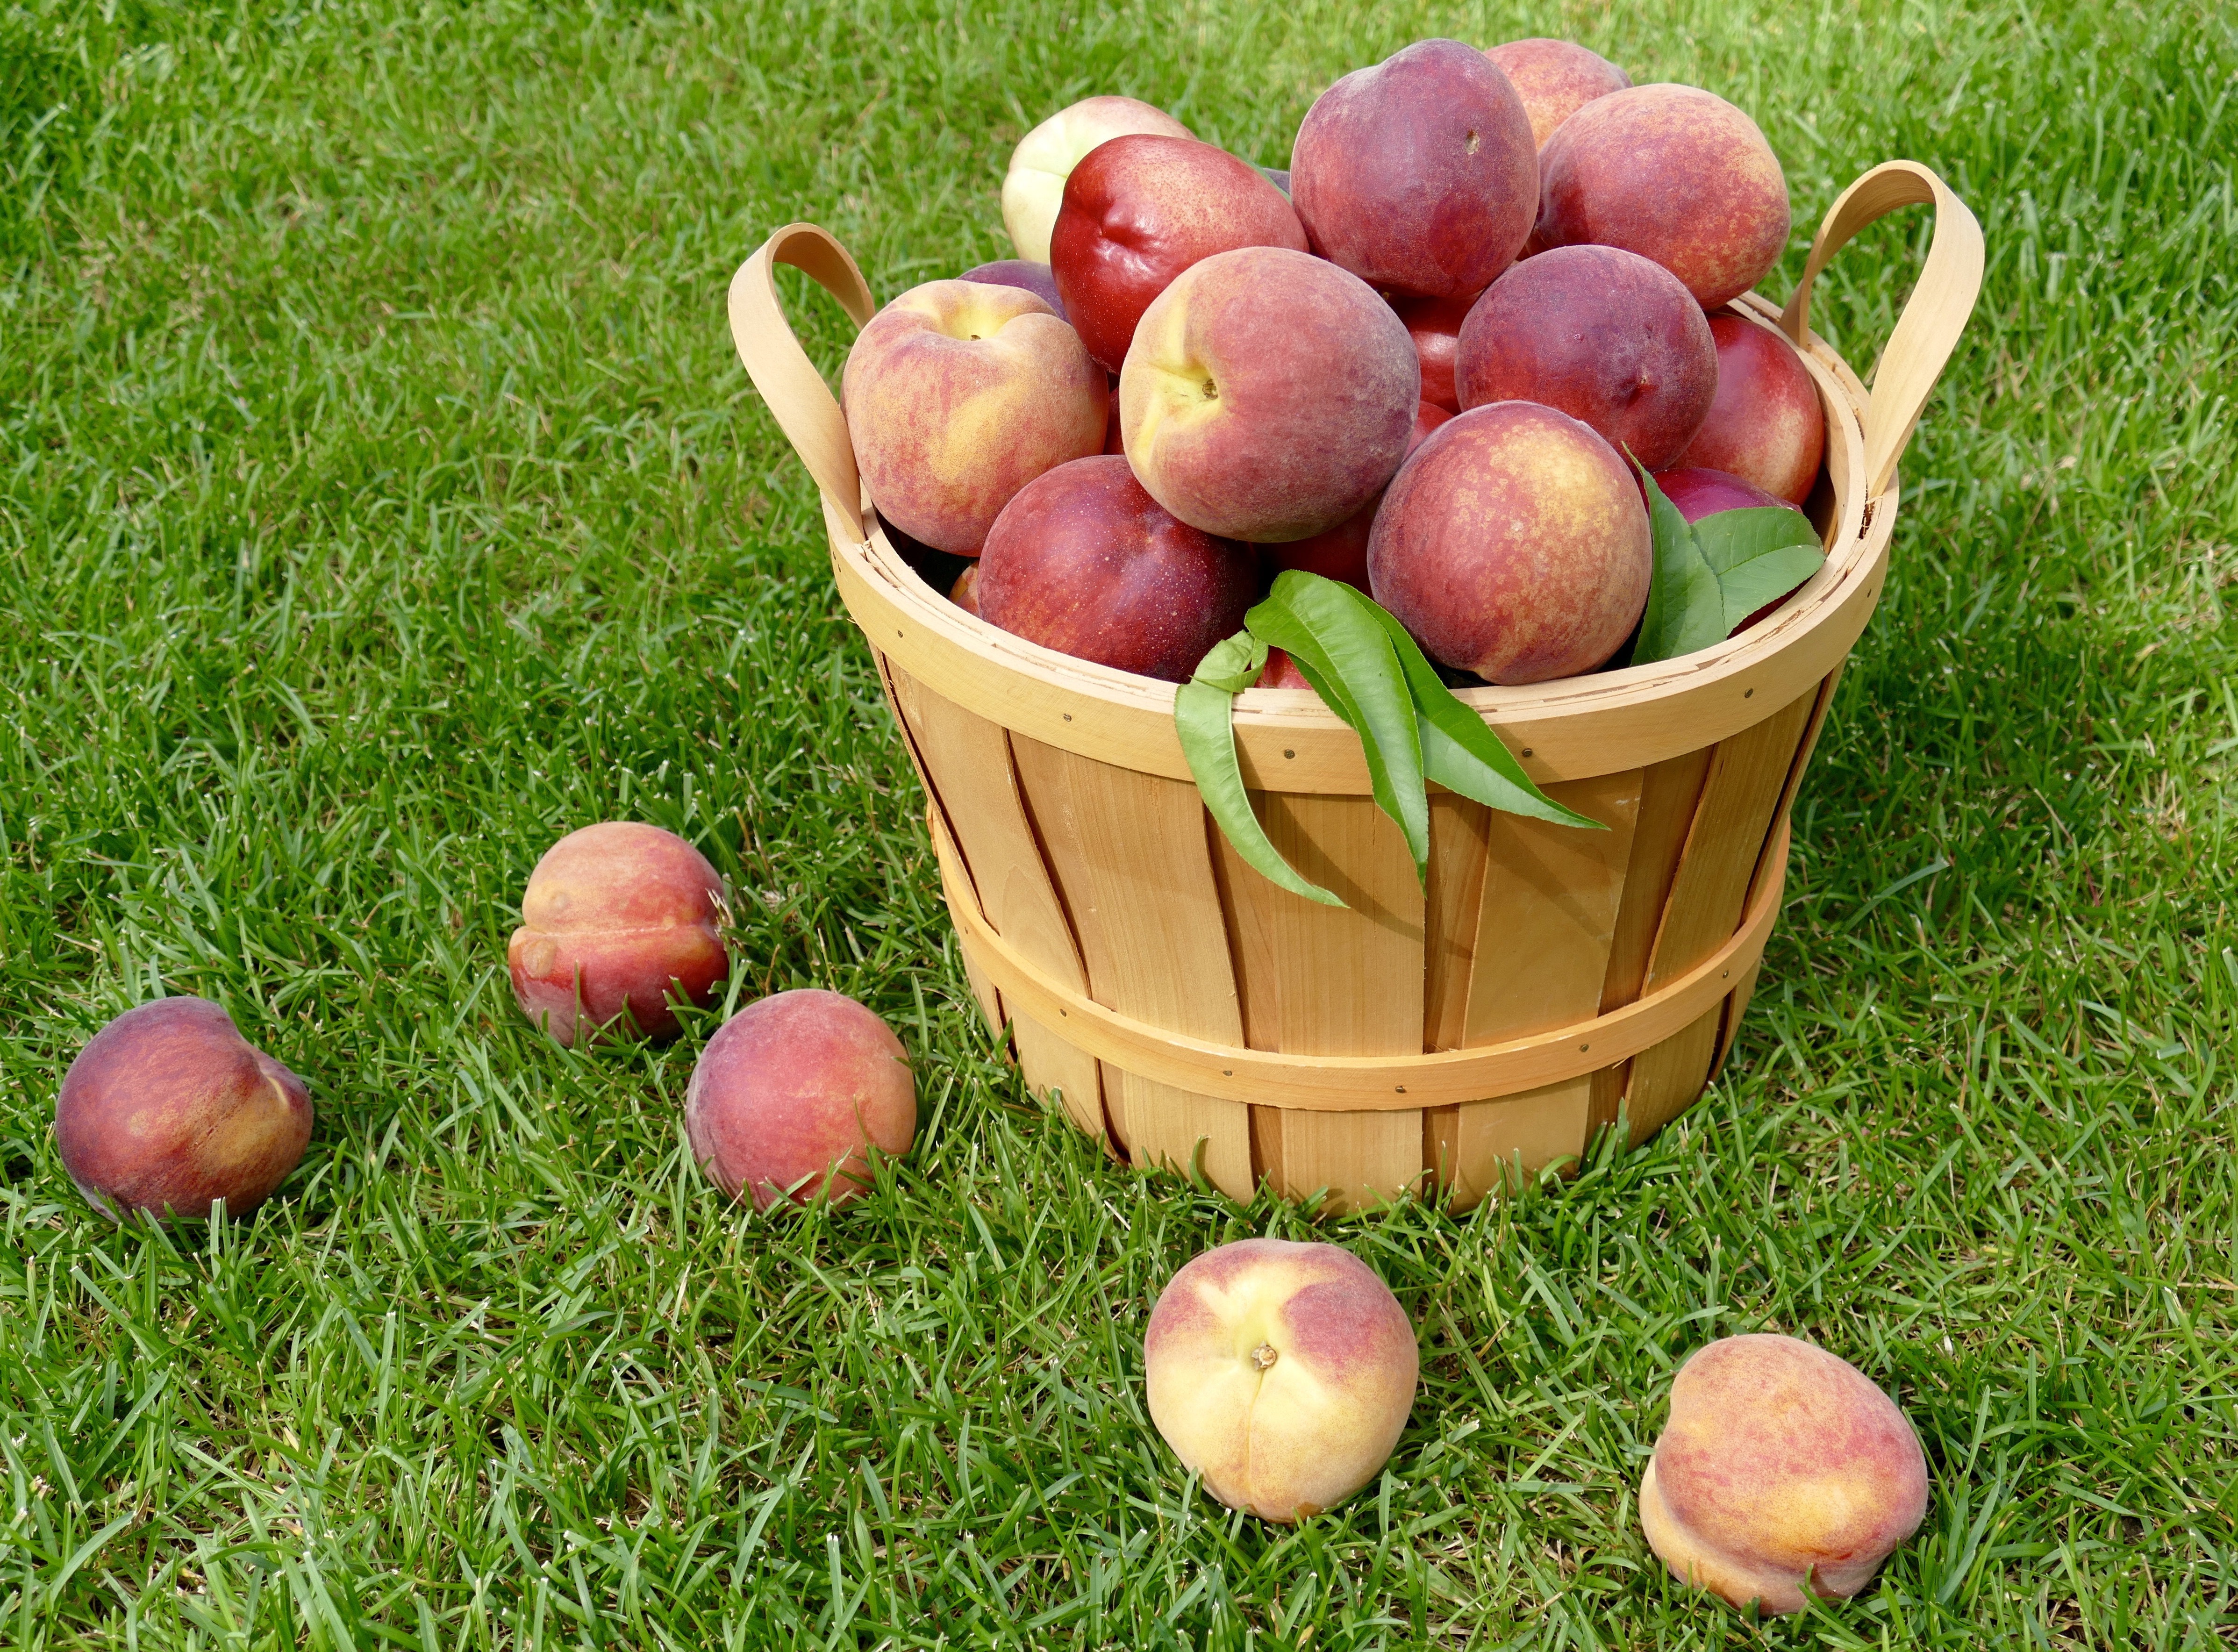 Wage A War Against Skin Damage With Peaches